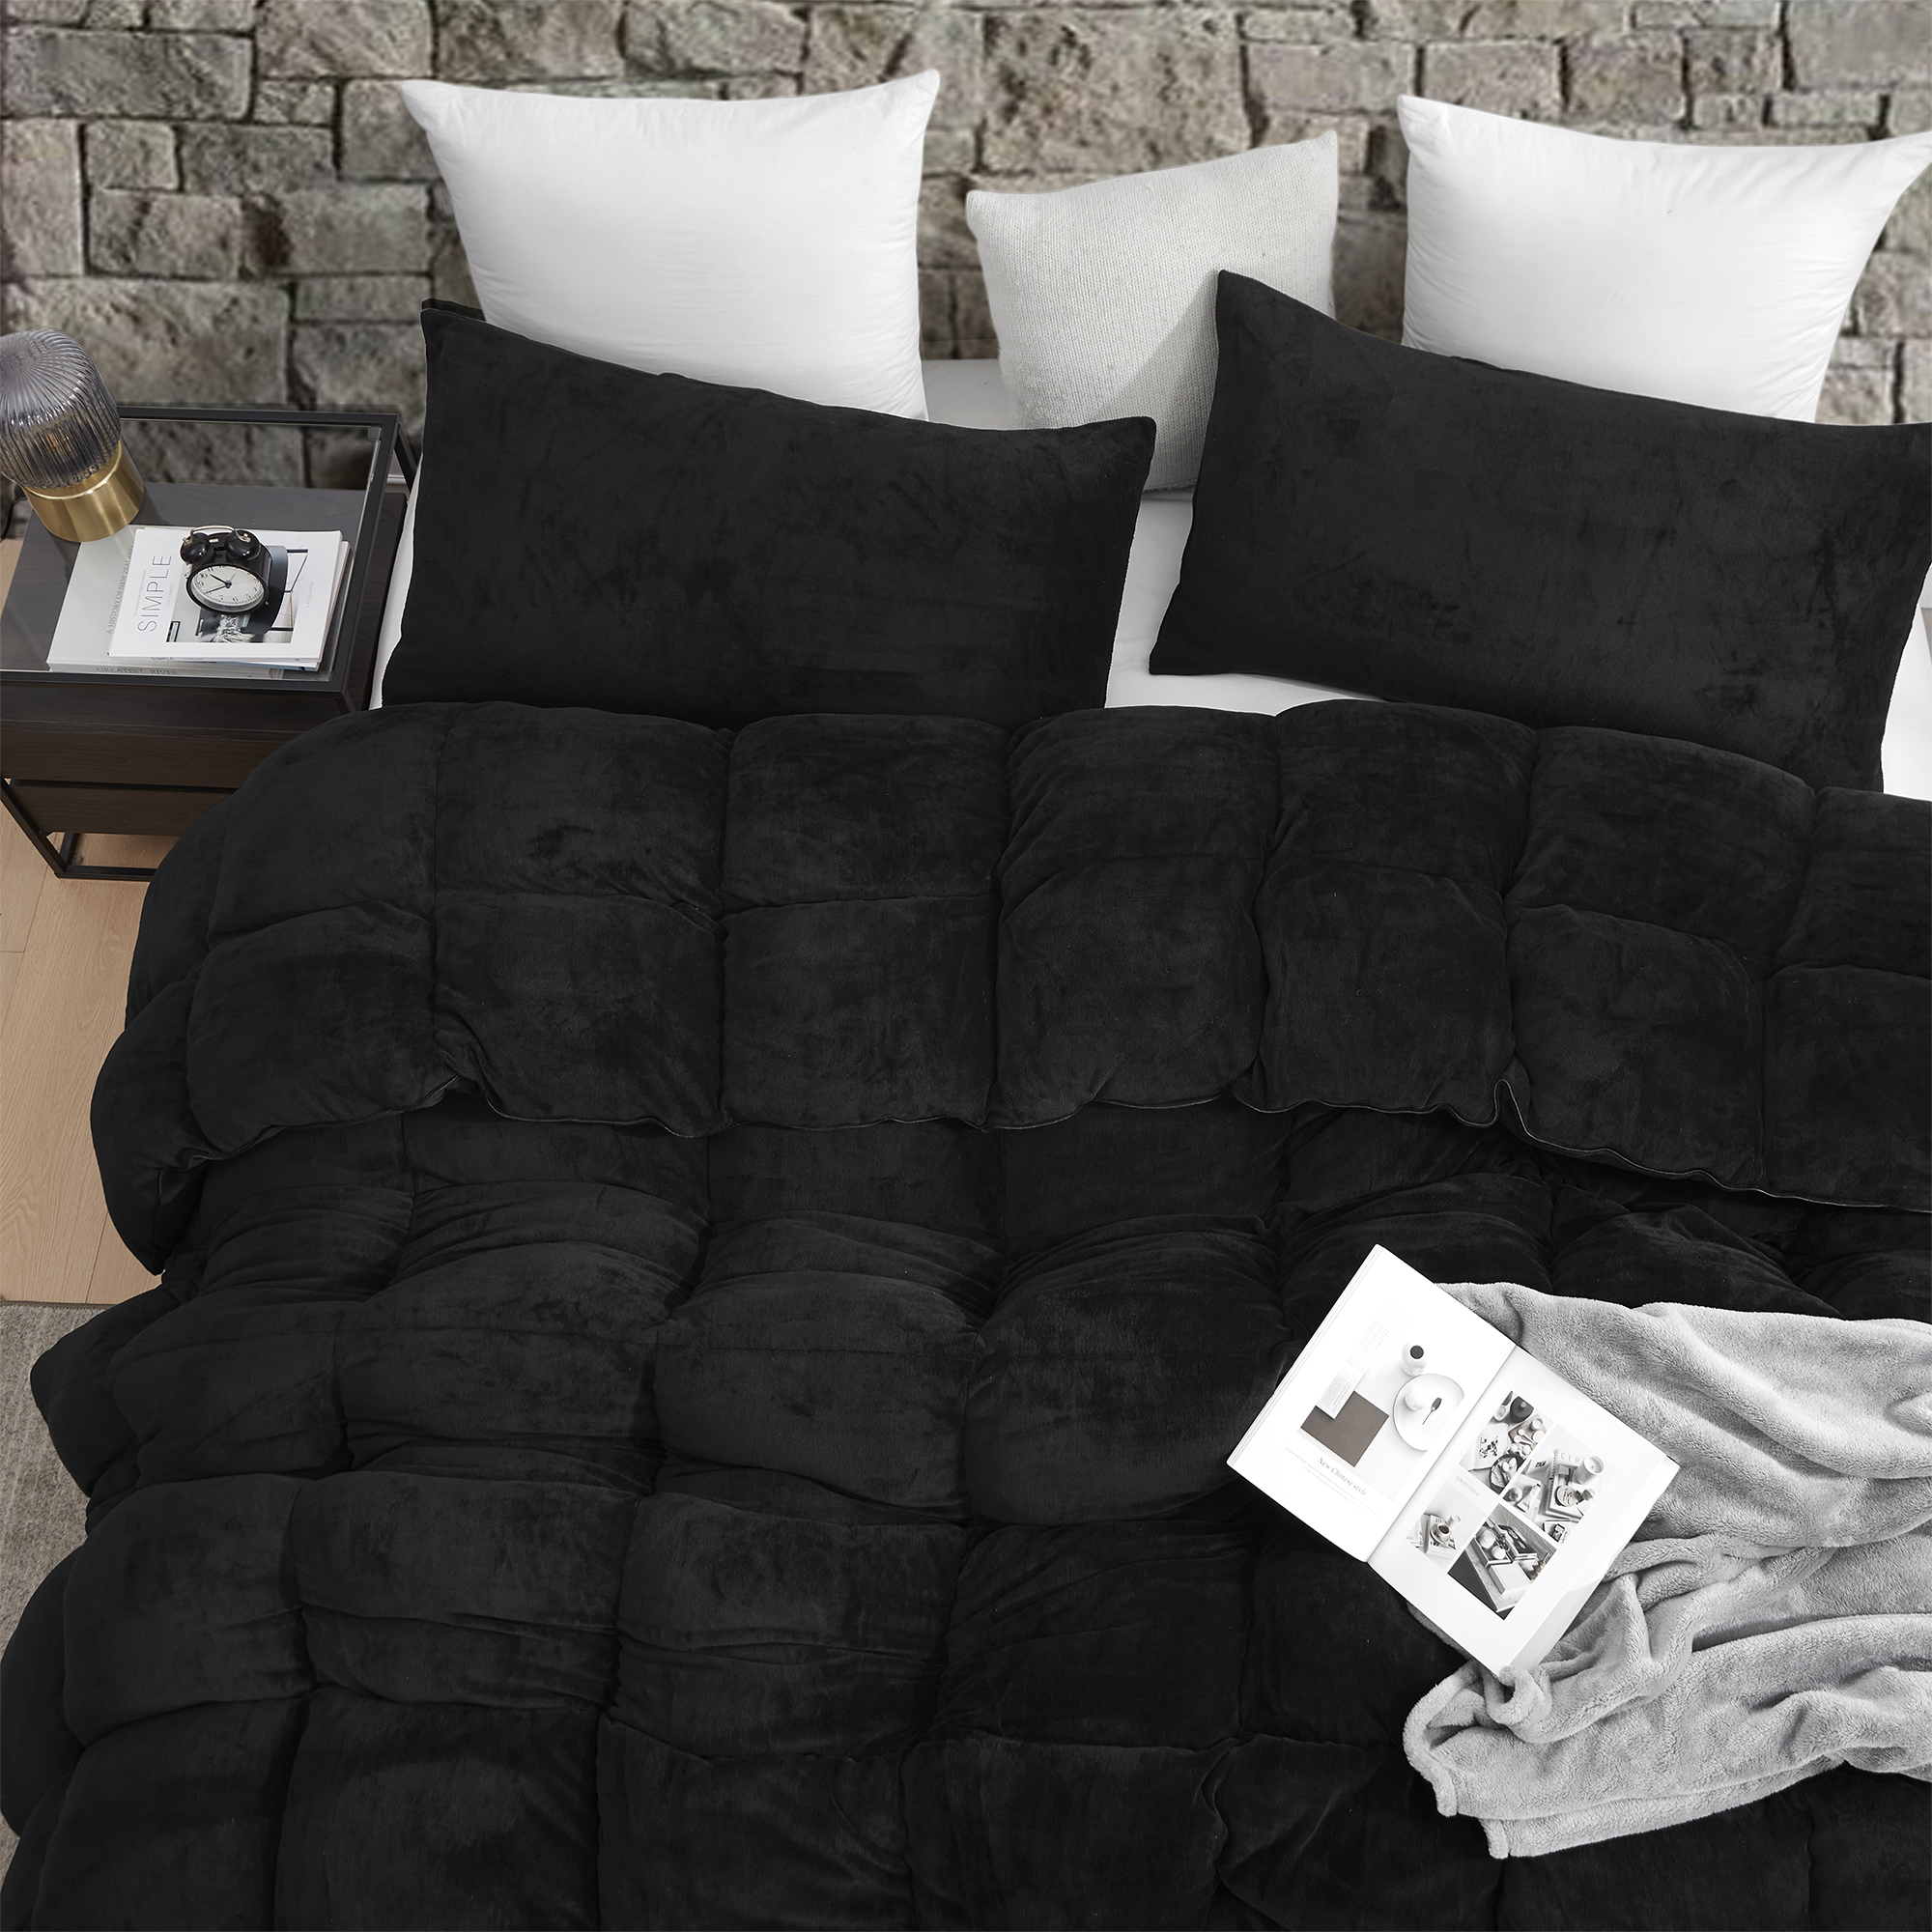 Dam Boi He Thick - Coma Inducer Comforter - Black